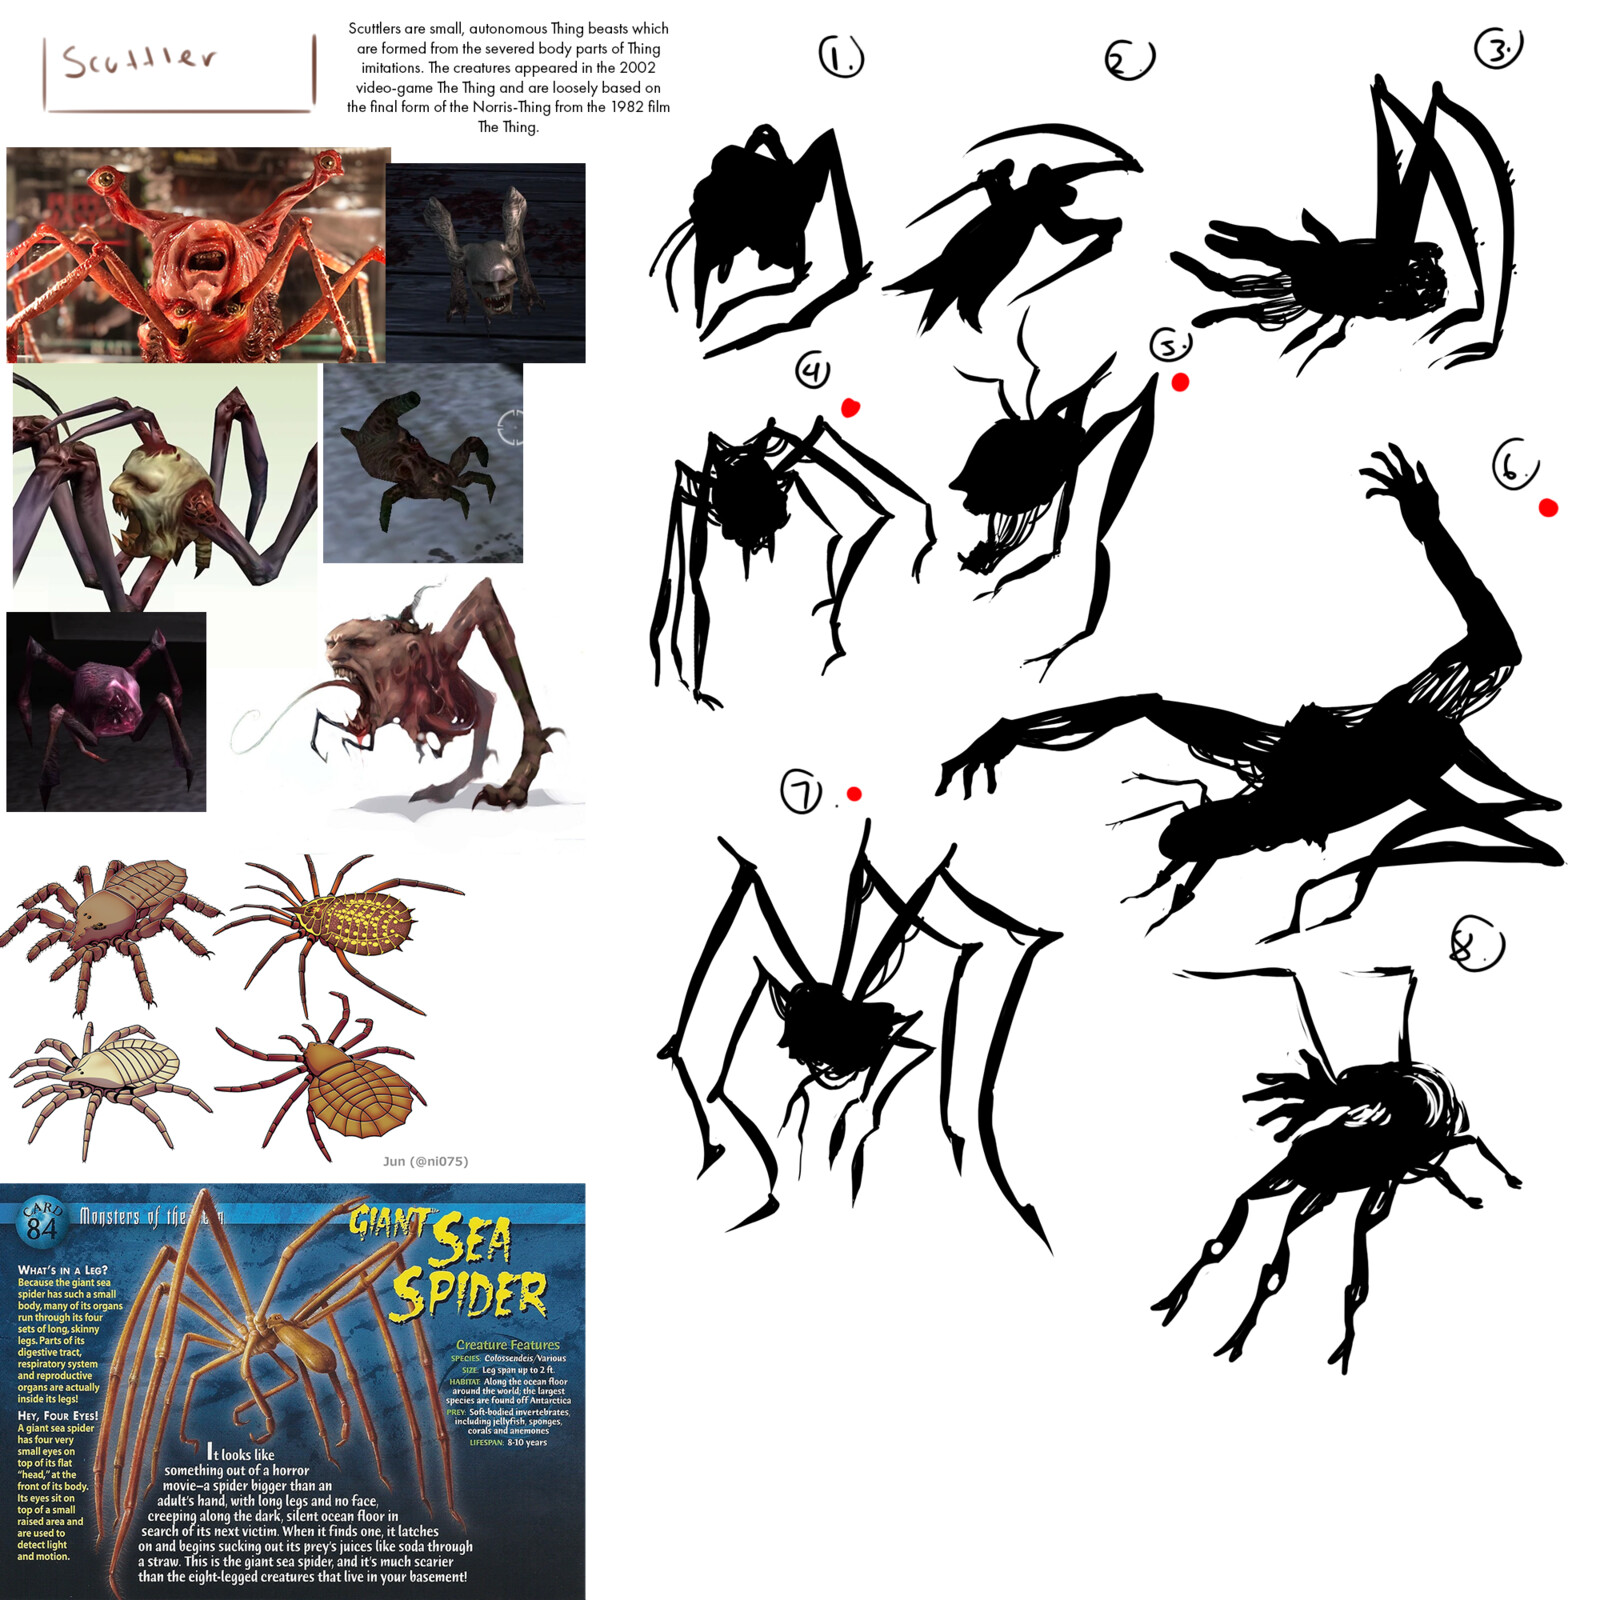 Inspiration from the game and movie assets but also incorporating ancient spiders and some spiders native to Antarctica.